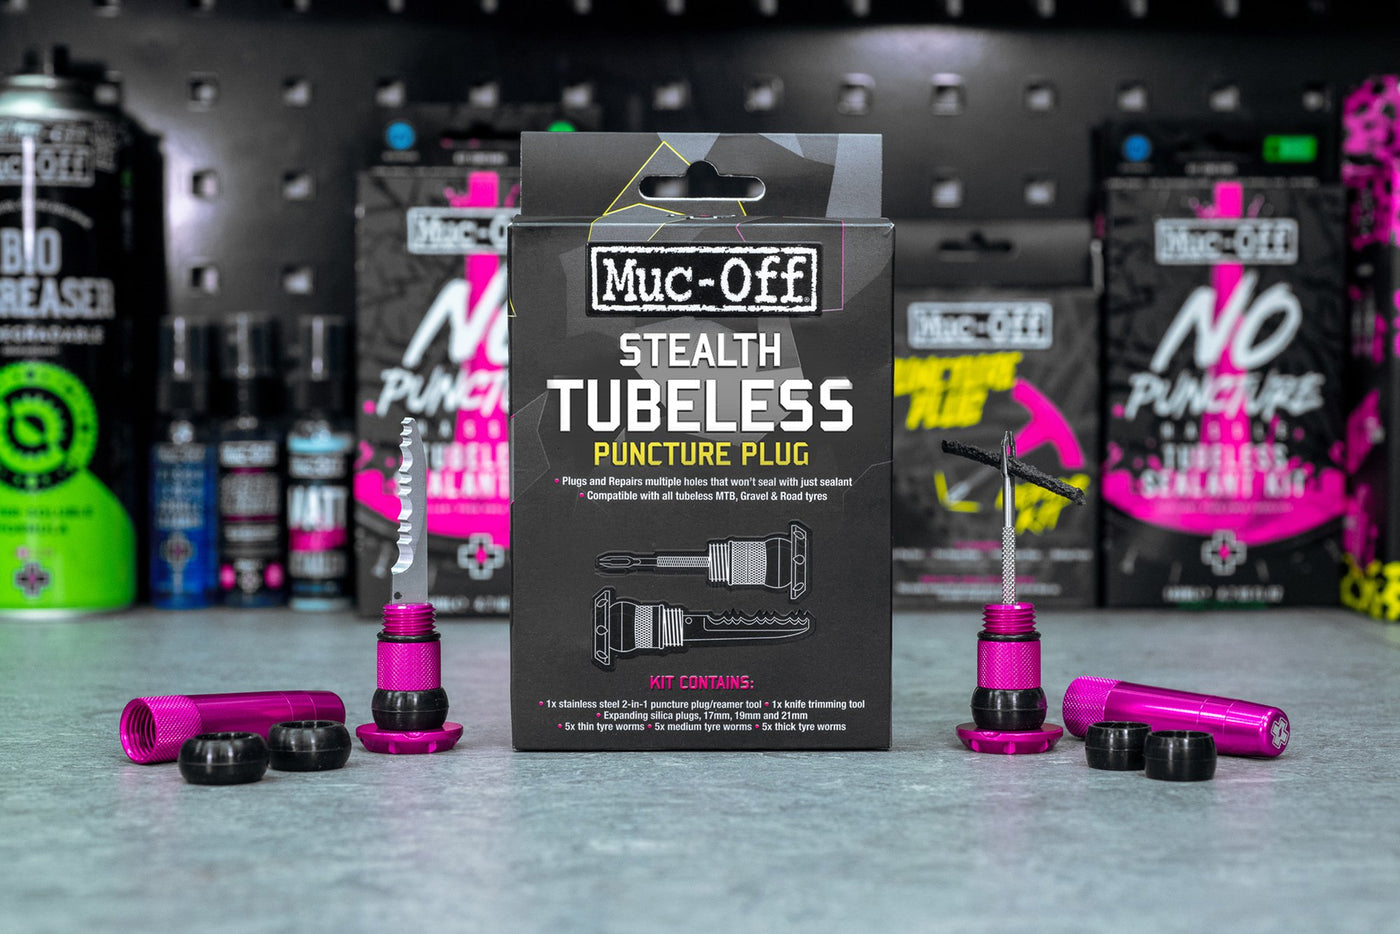 Muc-off Stealth tubeless puncture blug